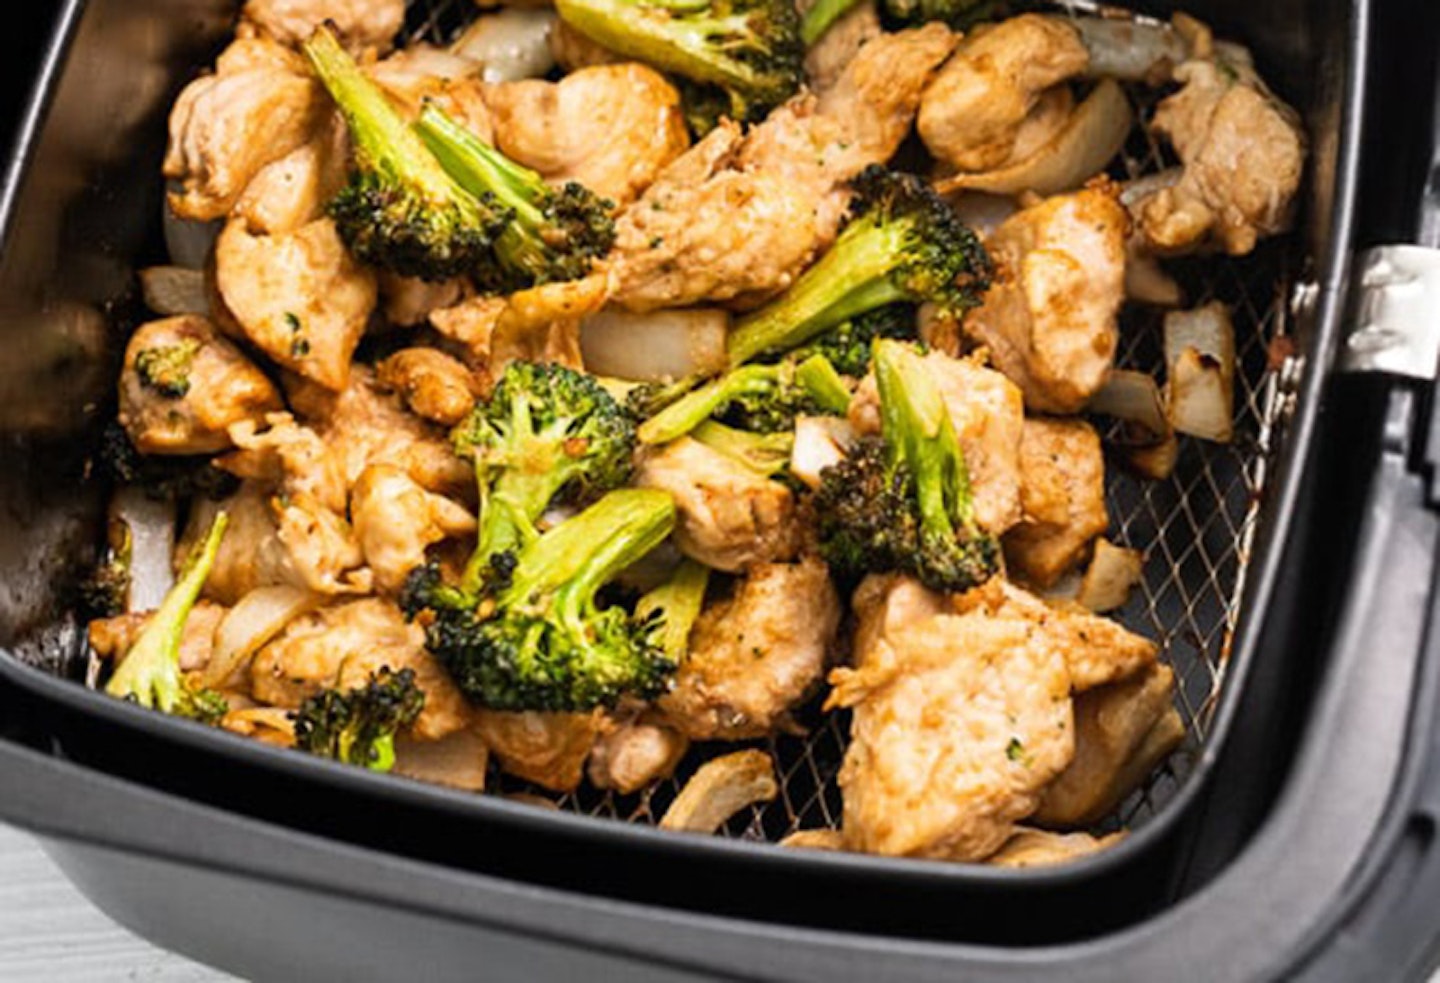 chicken and broccoli